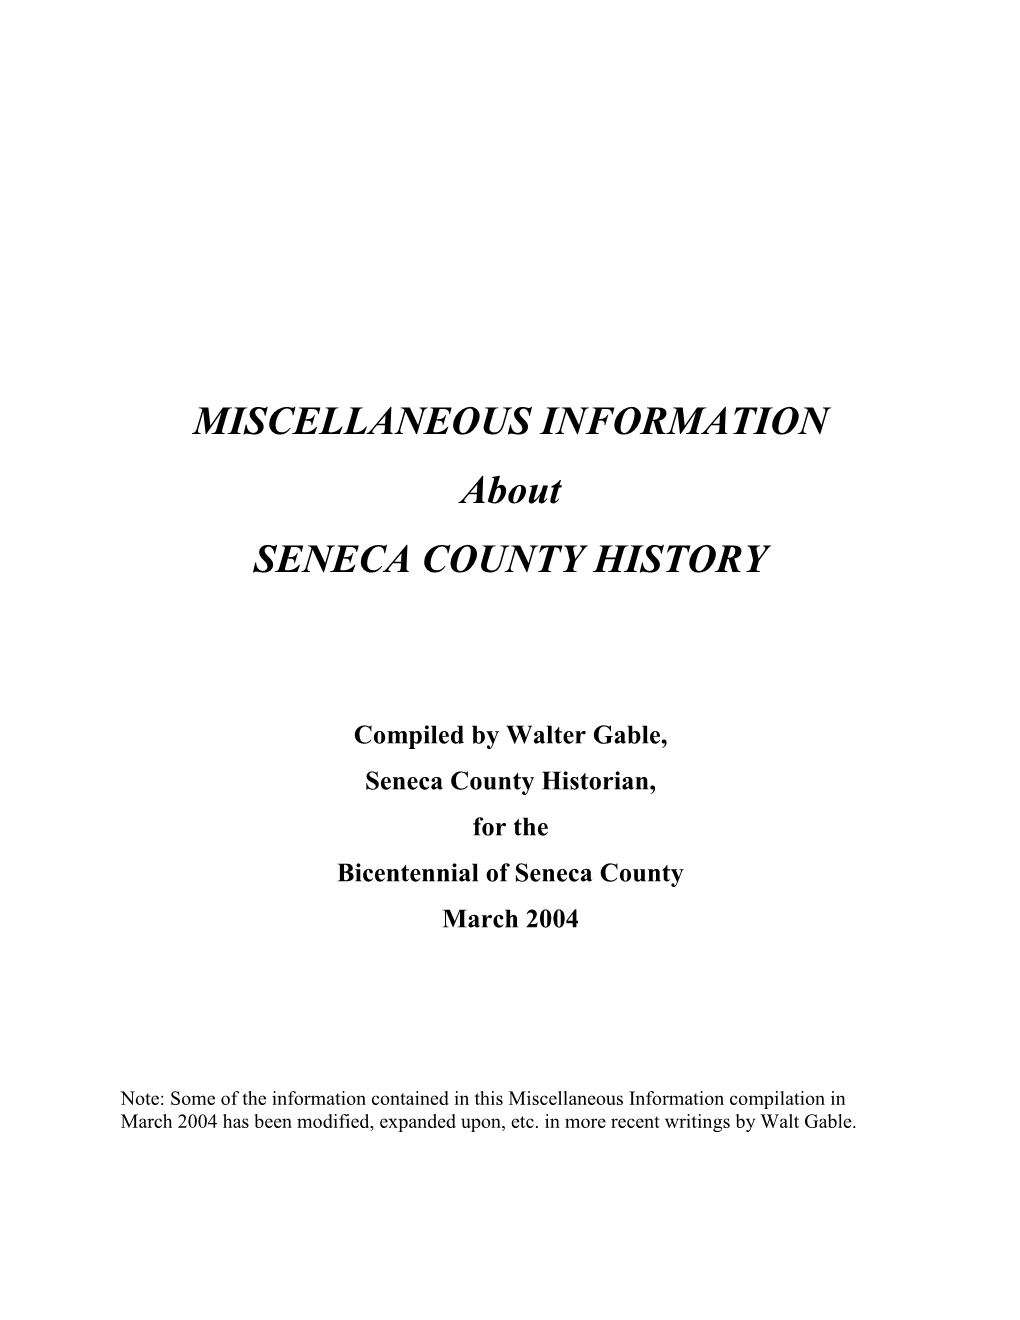 Miscellaneous Information About Seneca County History